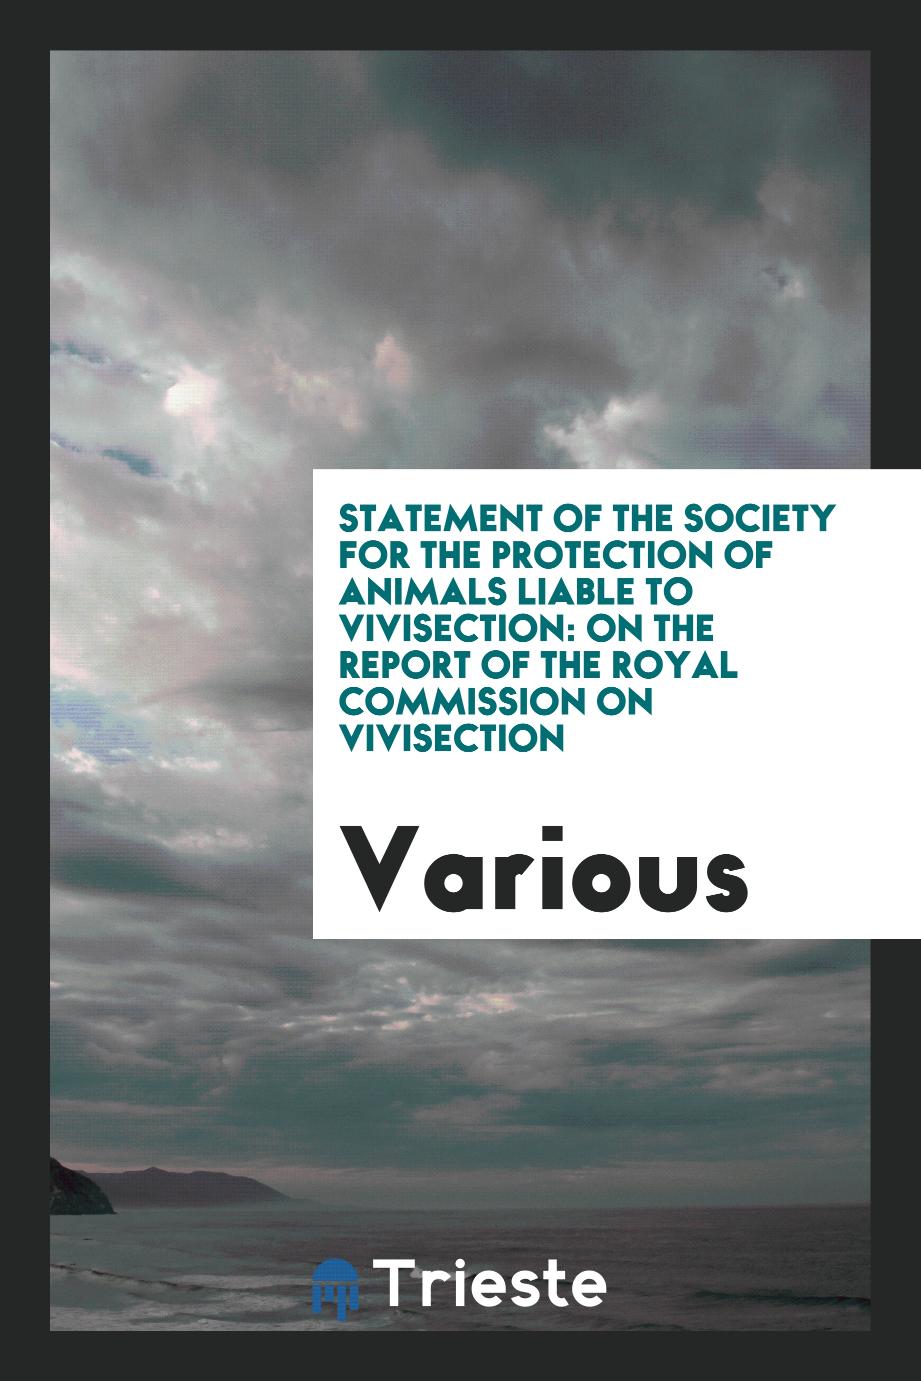 Statement of the Society for the Protection of Animals Liable to Vivisection: On the Report of the Royal Commission on Vivisection